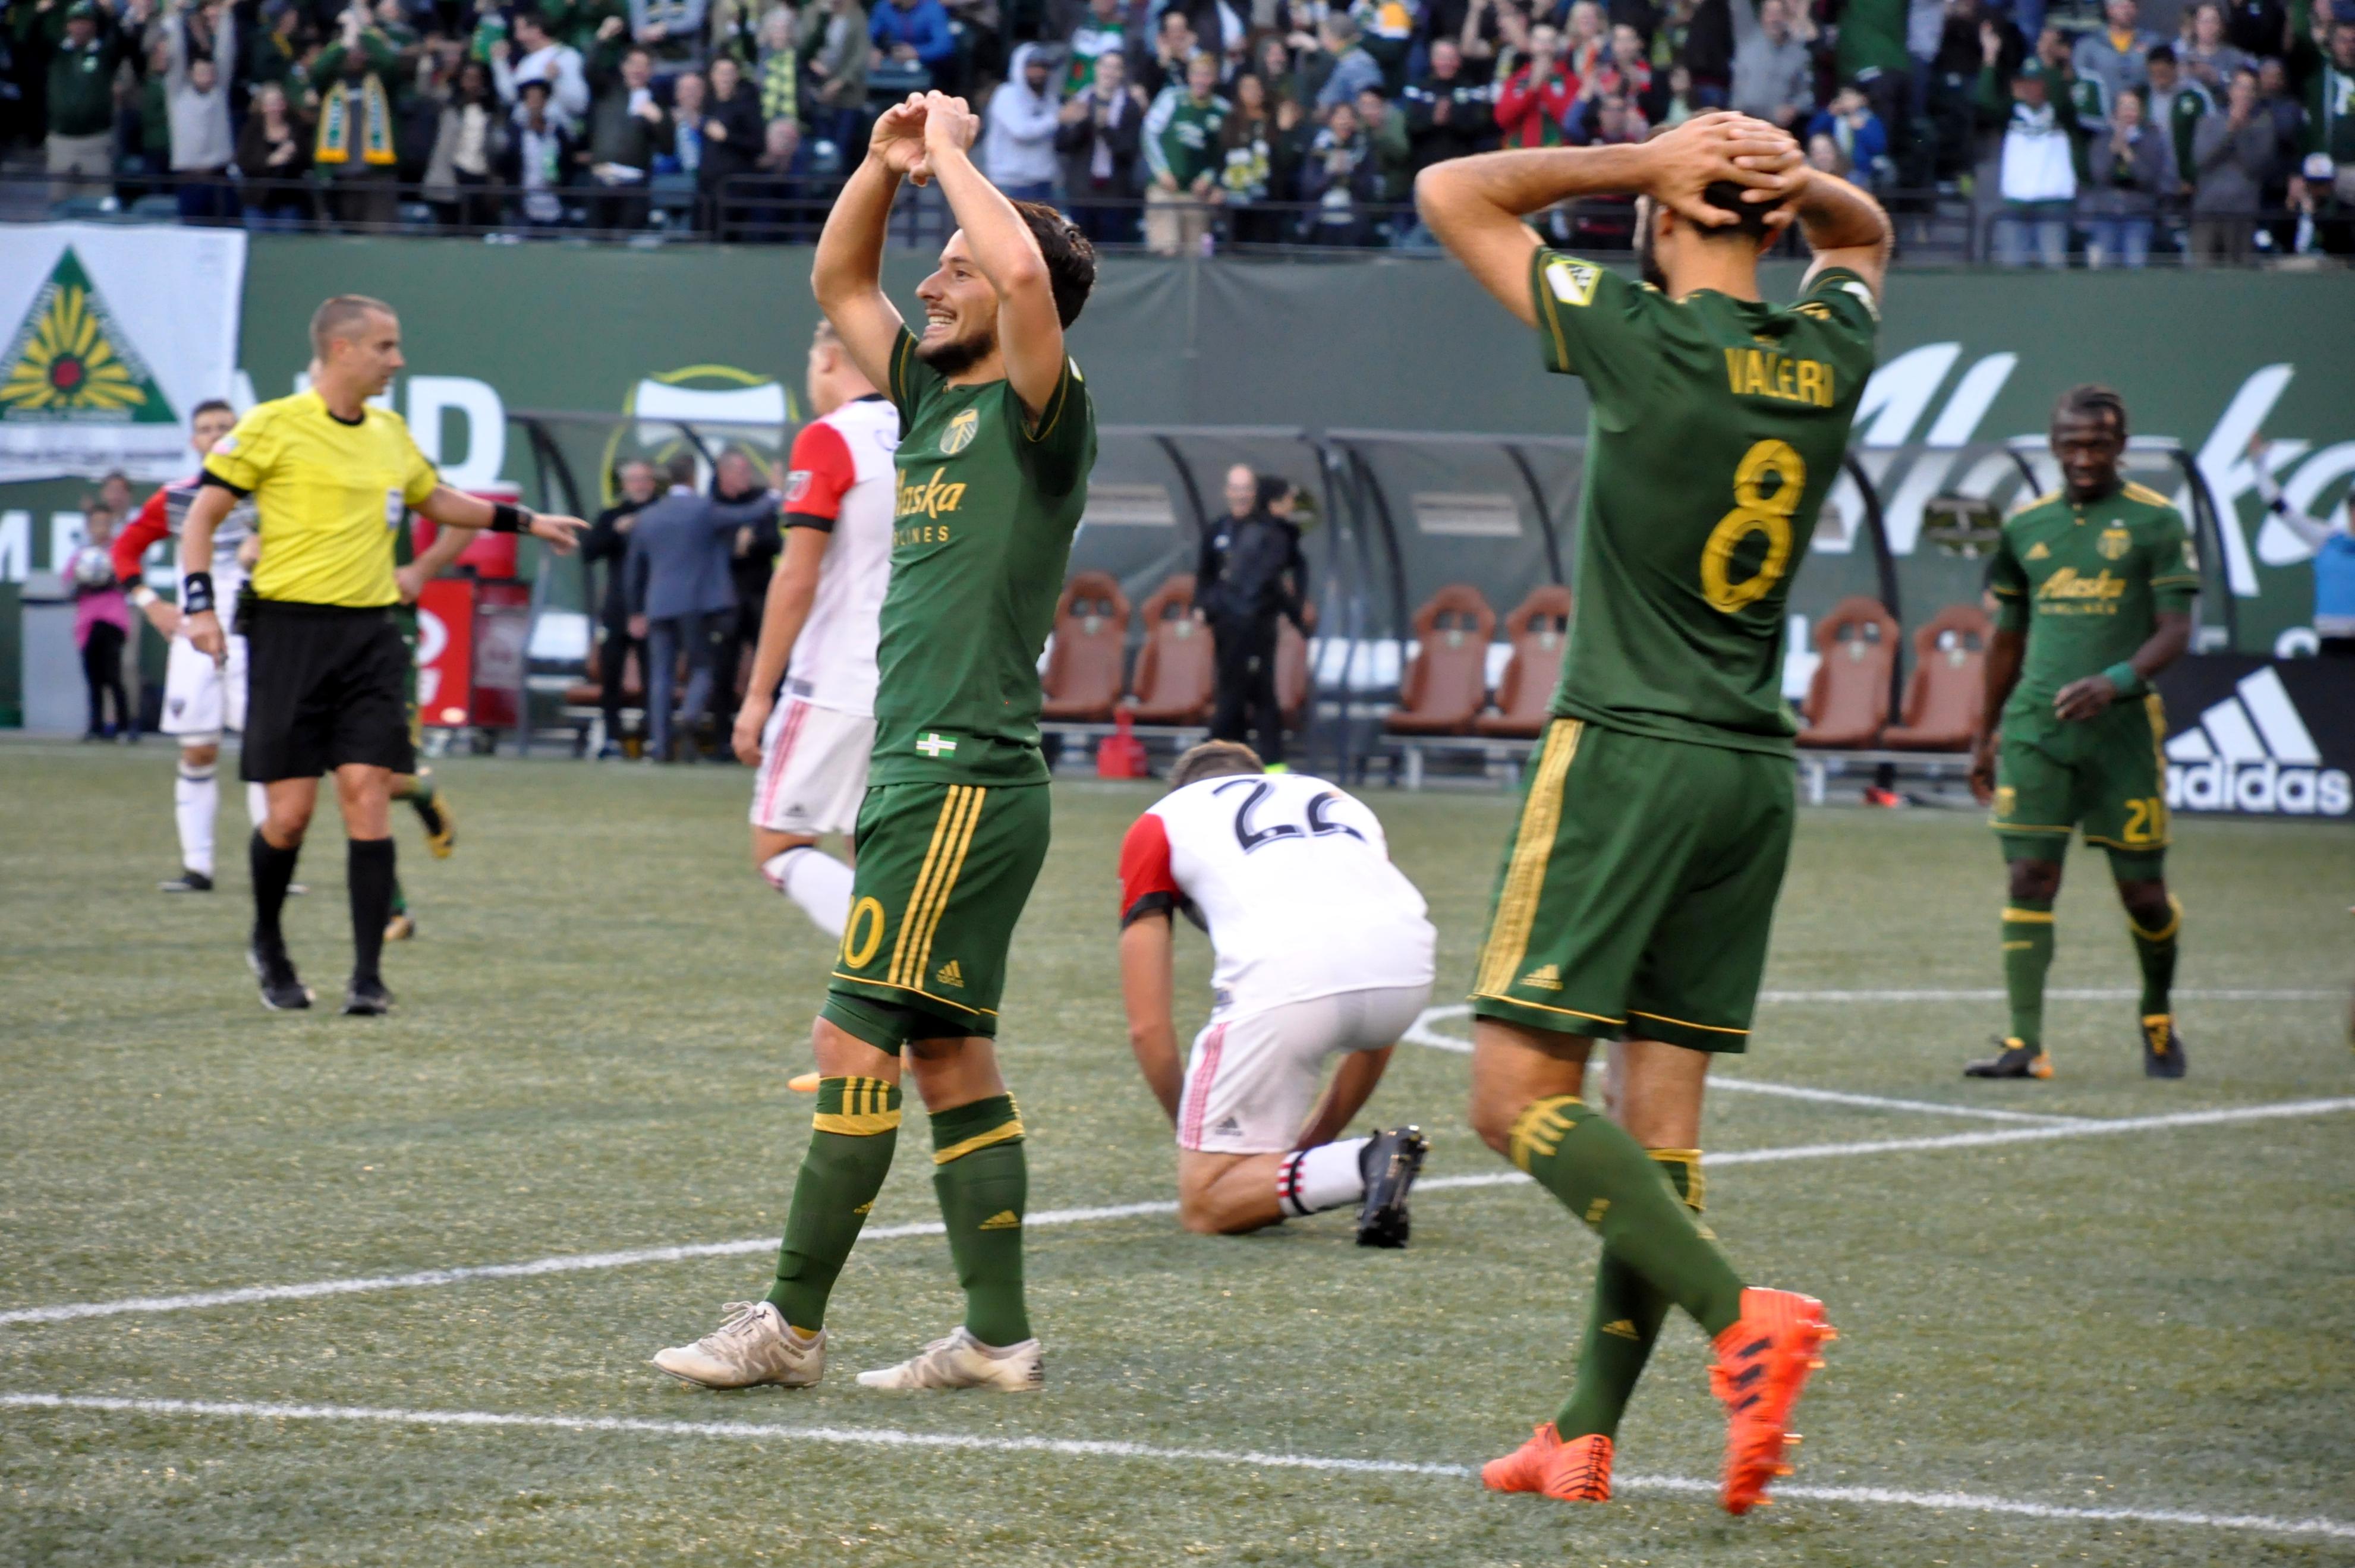 Timbers continue strong home form with 4-0 win over DC United